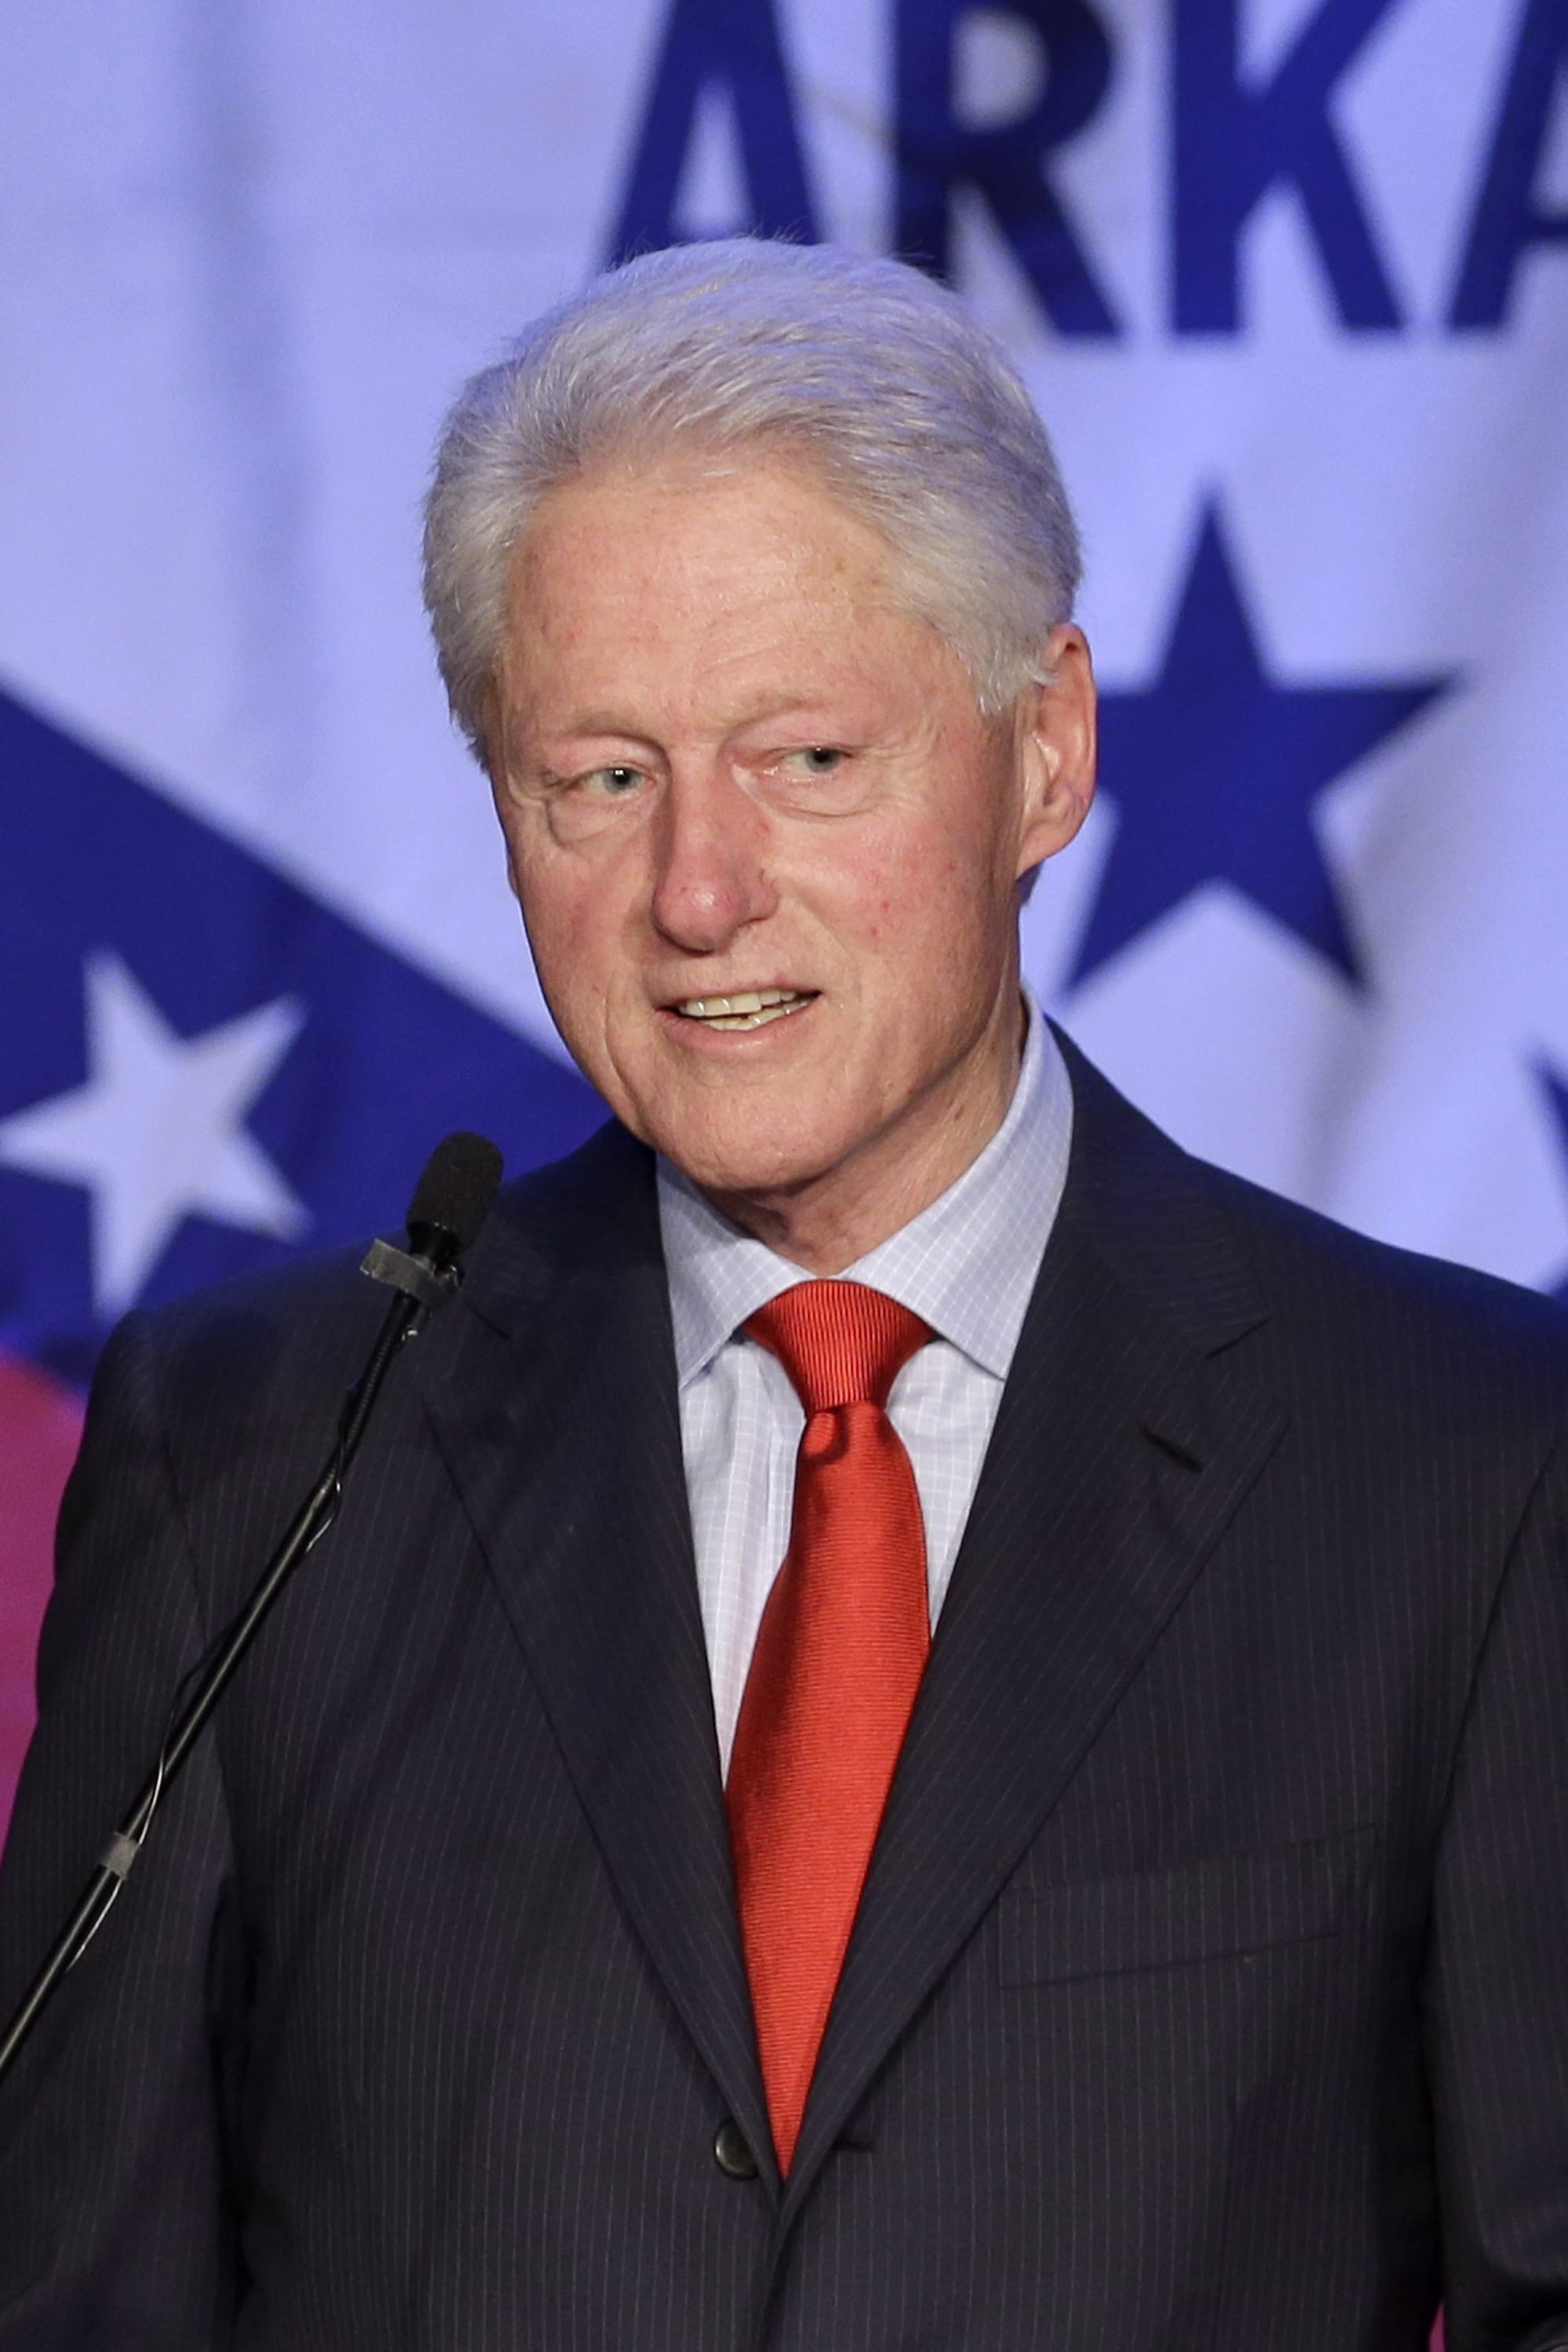 Bill Clinton
Former president says wife healthy, fit